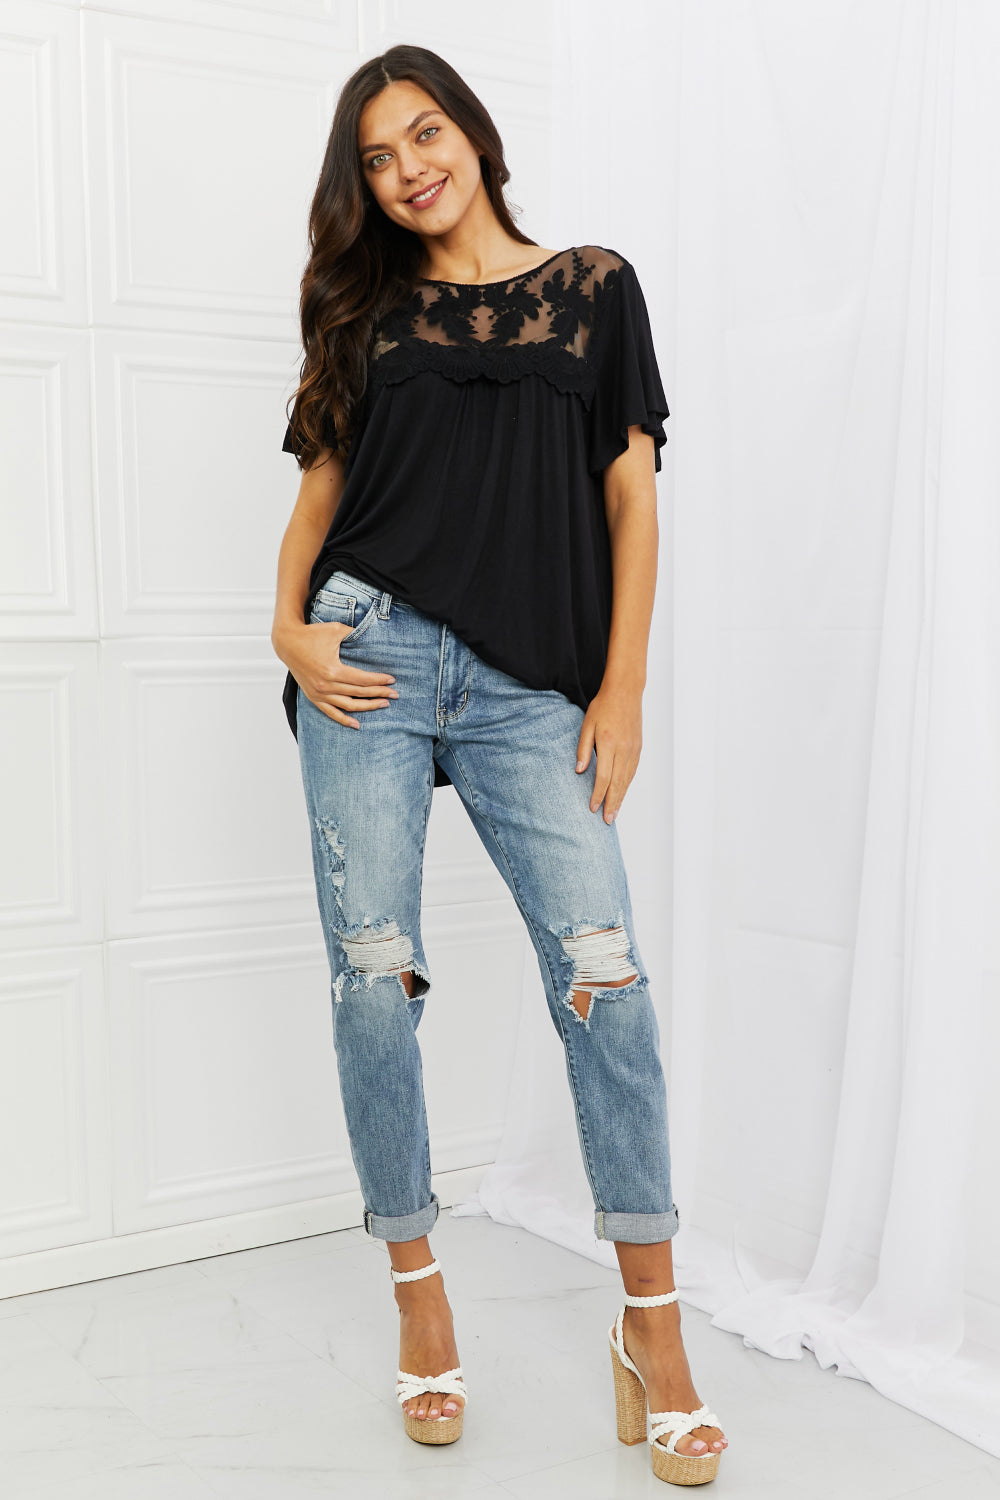 Culture Code Ready To Go Full Size Lace Embroidered Top in Black - The Fashion Unicorn